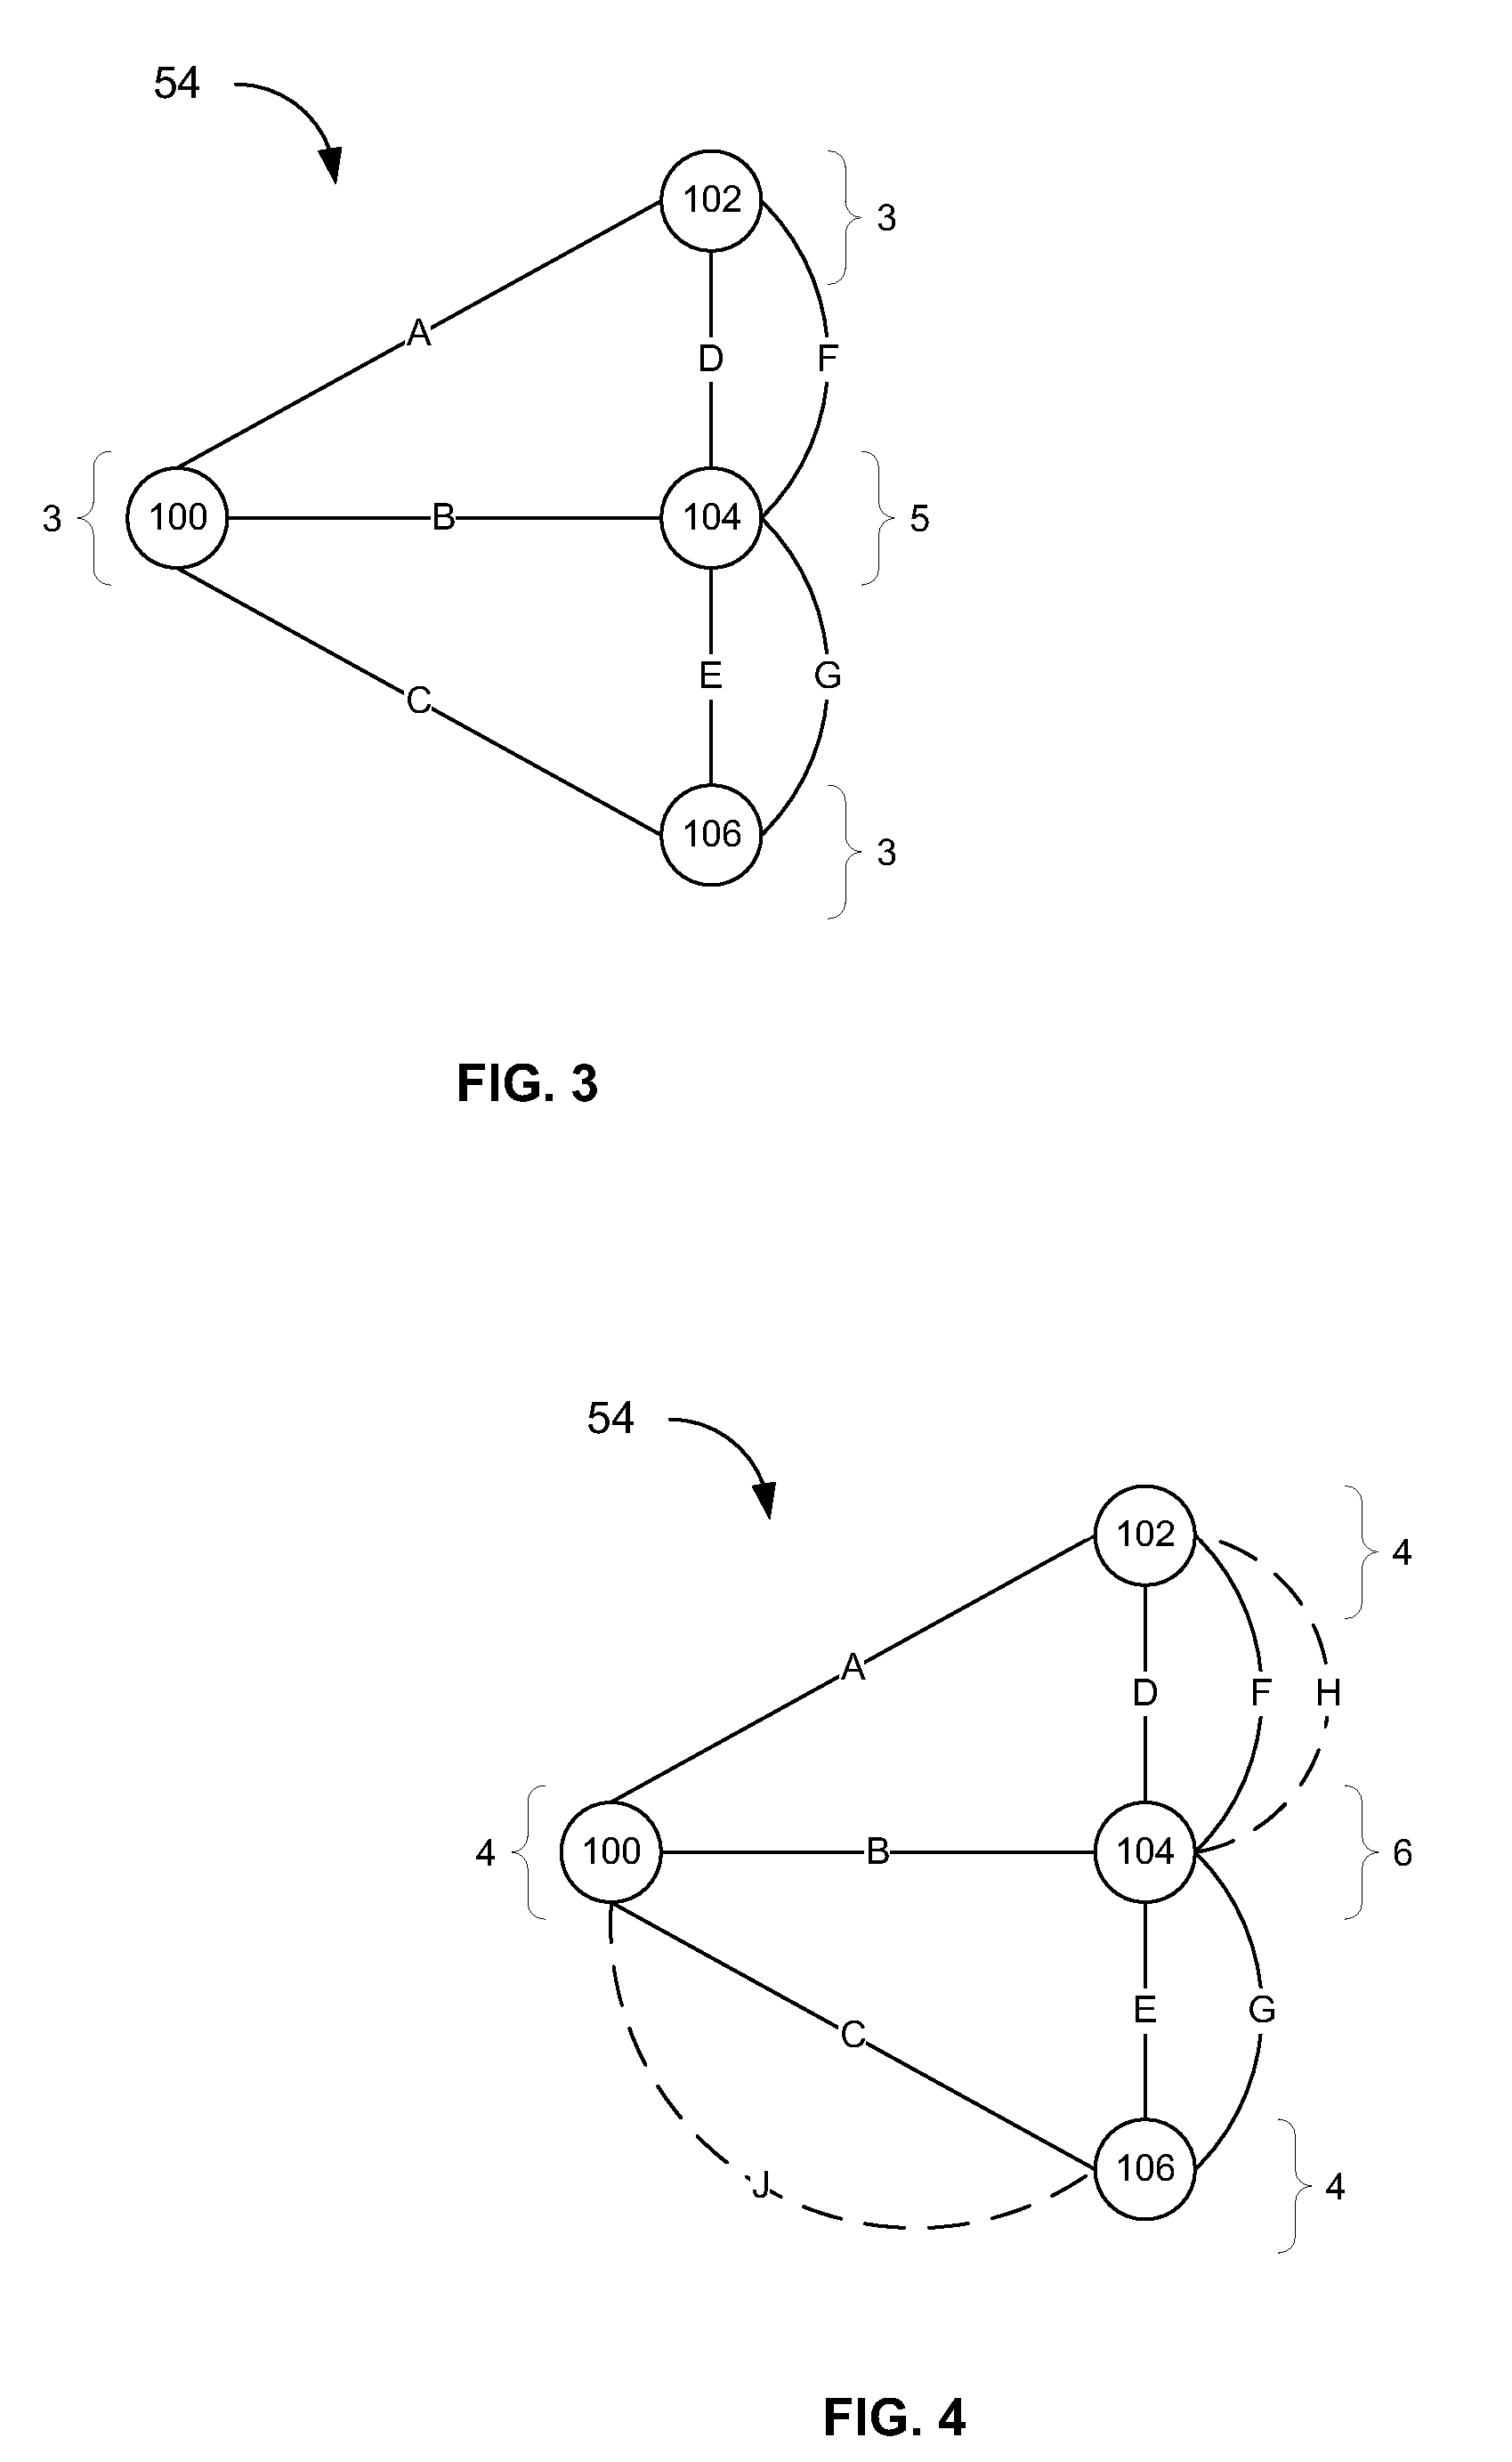 System and Method for Identifying Nodes in a Wireless Network